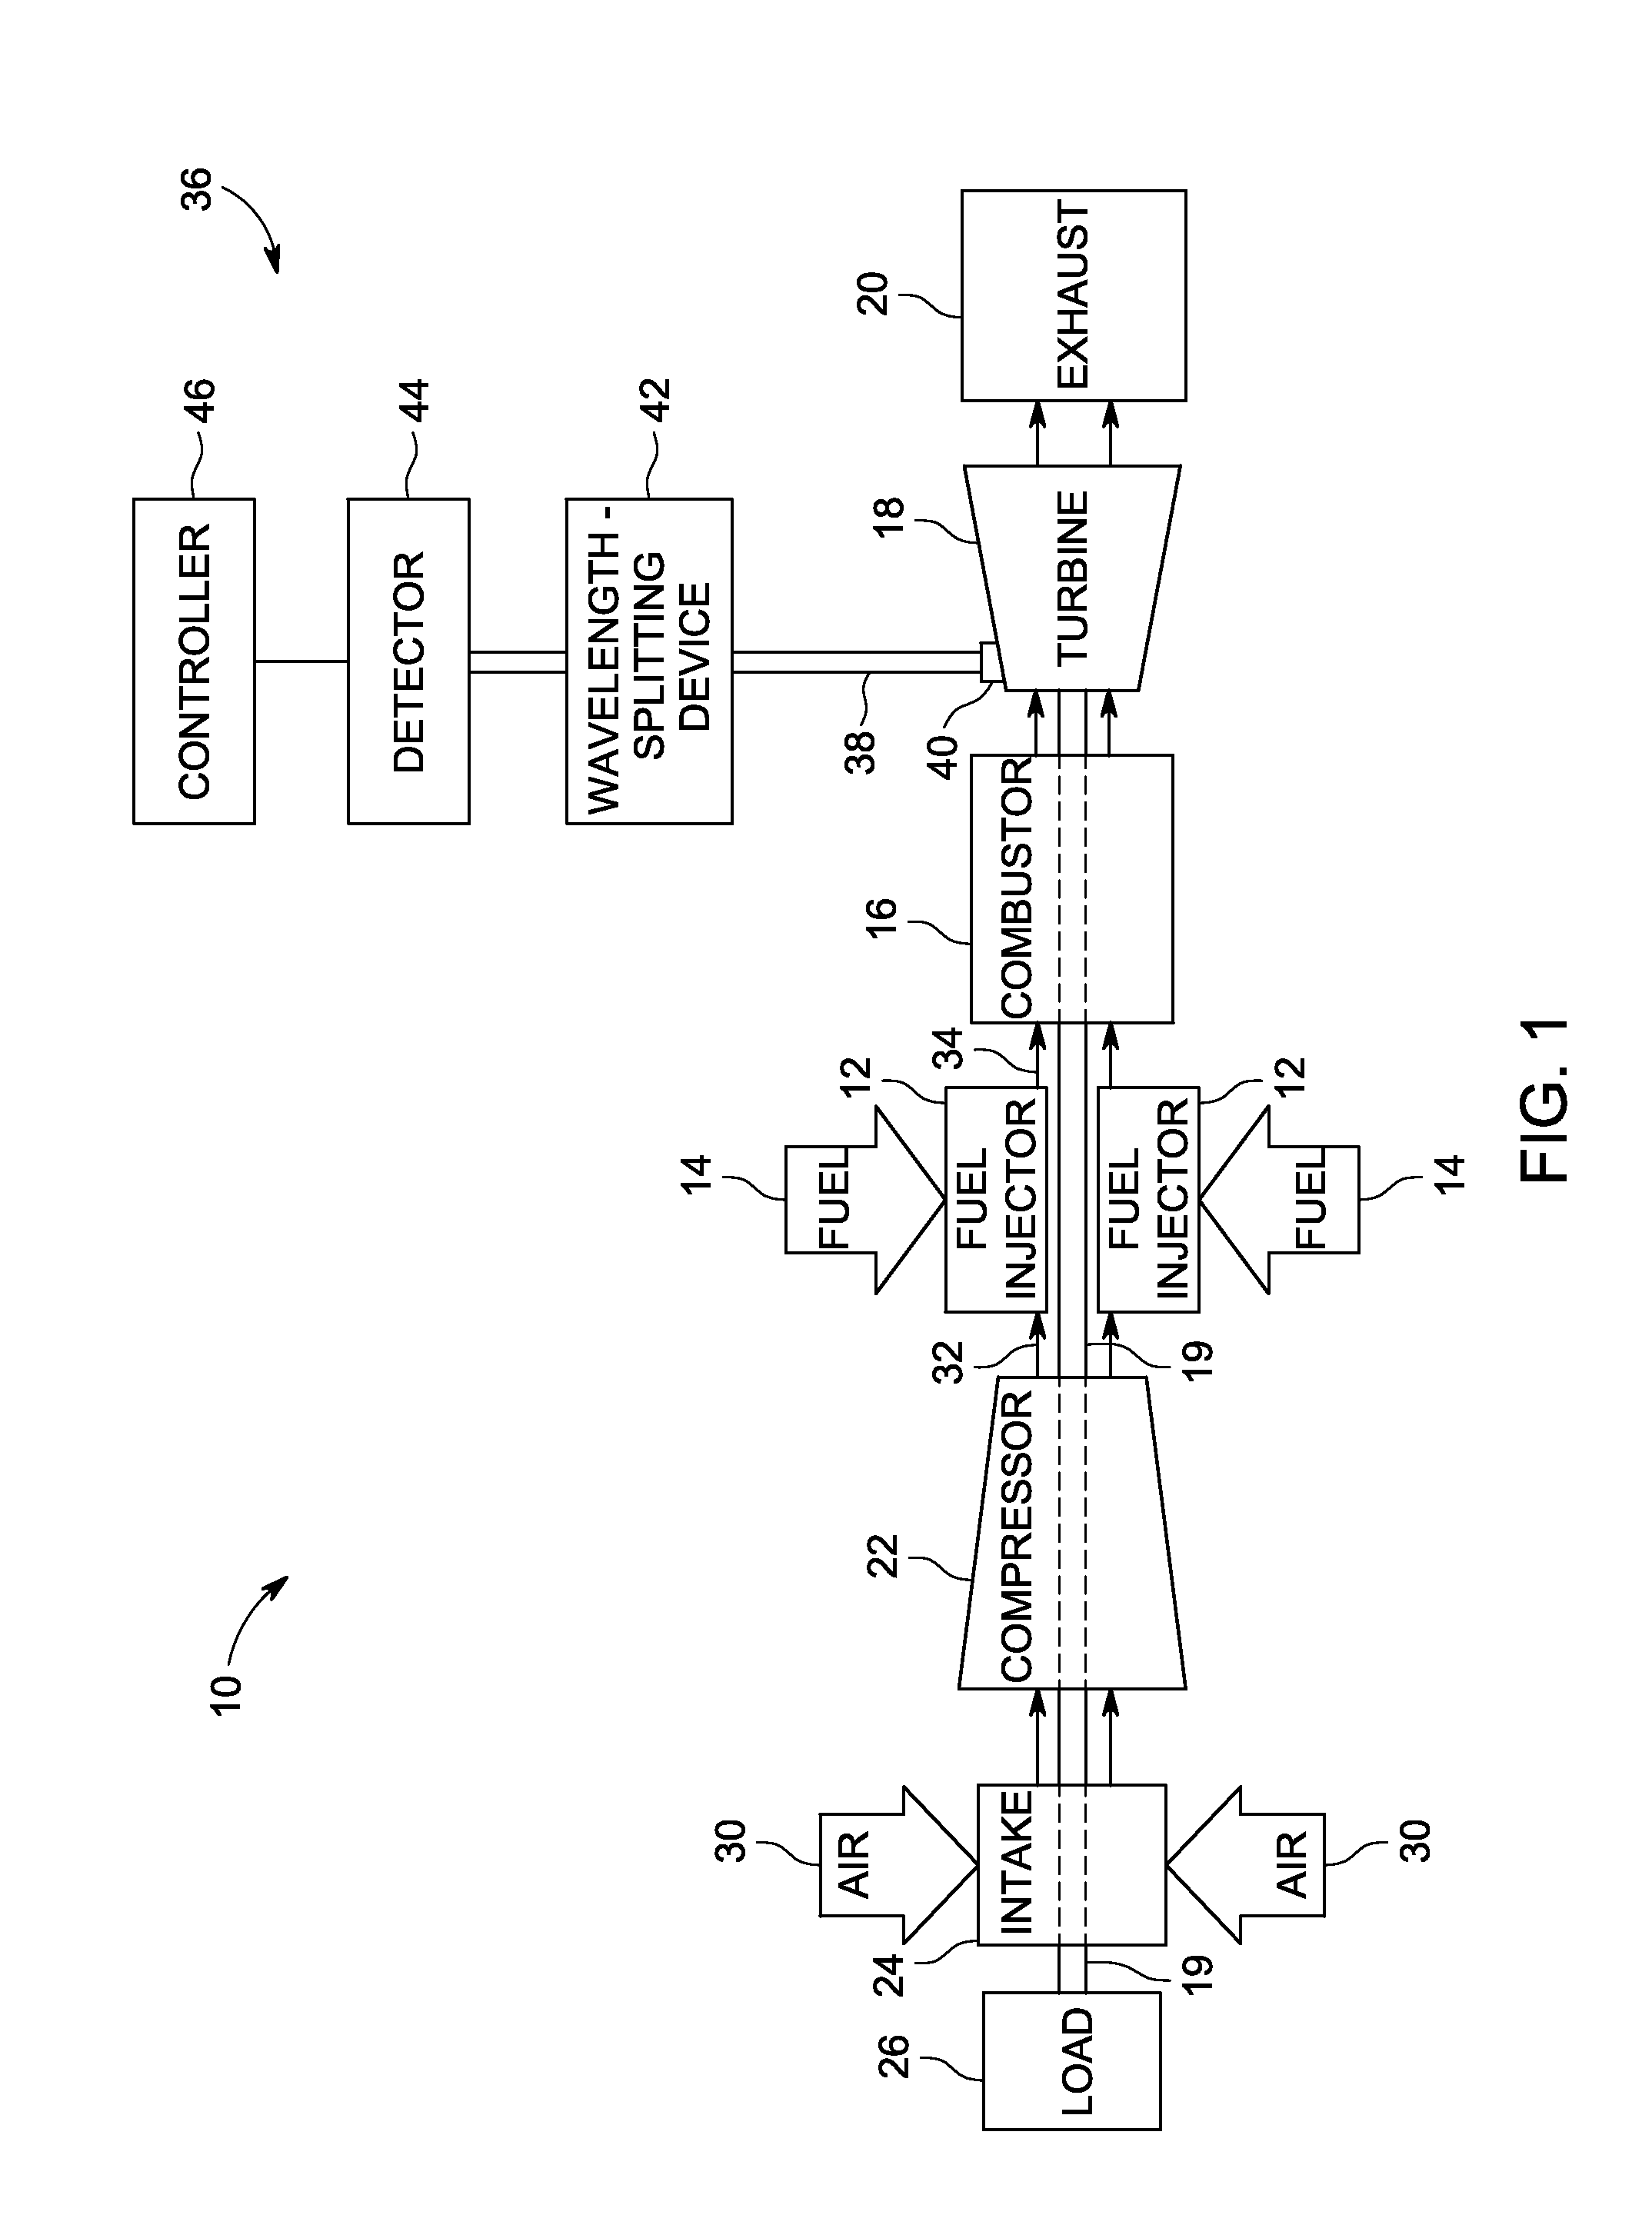 System and method for detecting spall within a turbine engine